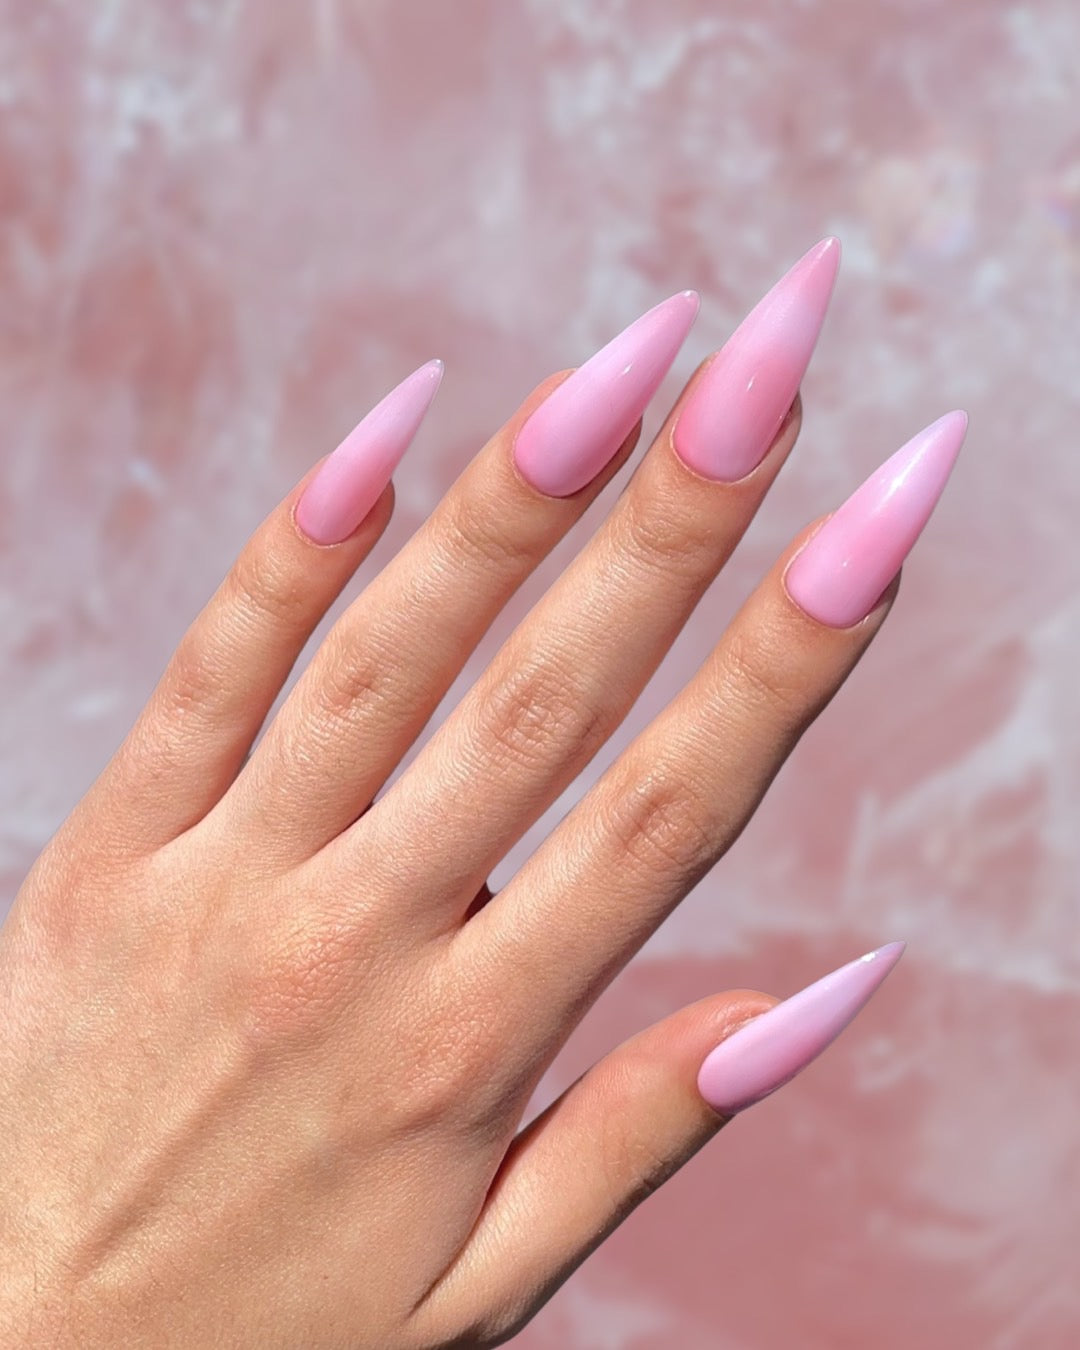 Buy MISUD Stiletto Fake Nails 24 Pcs Light Pink Glossy Wearable Detachable  Reusable Press-on Artificial False Nail Tips - Sweety Ladies Online at Low  Prices in India - Amazon.in